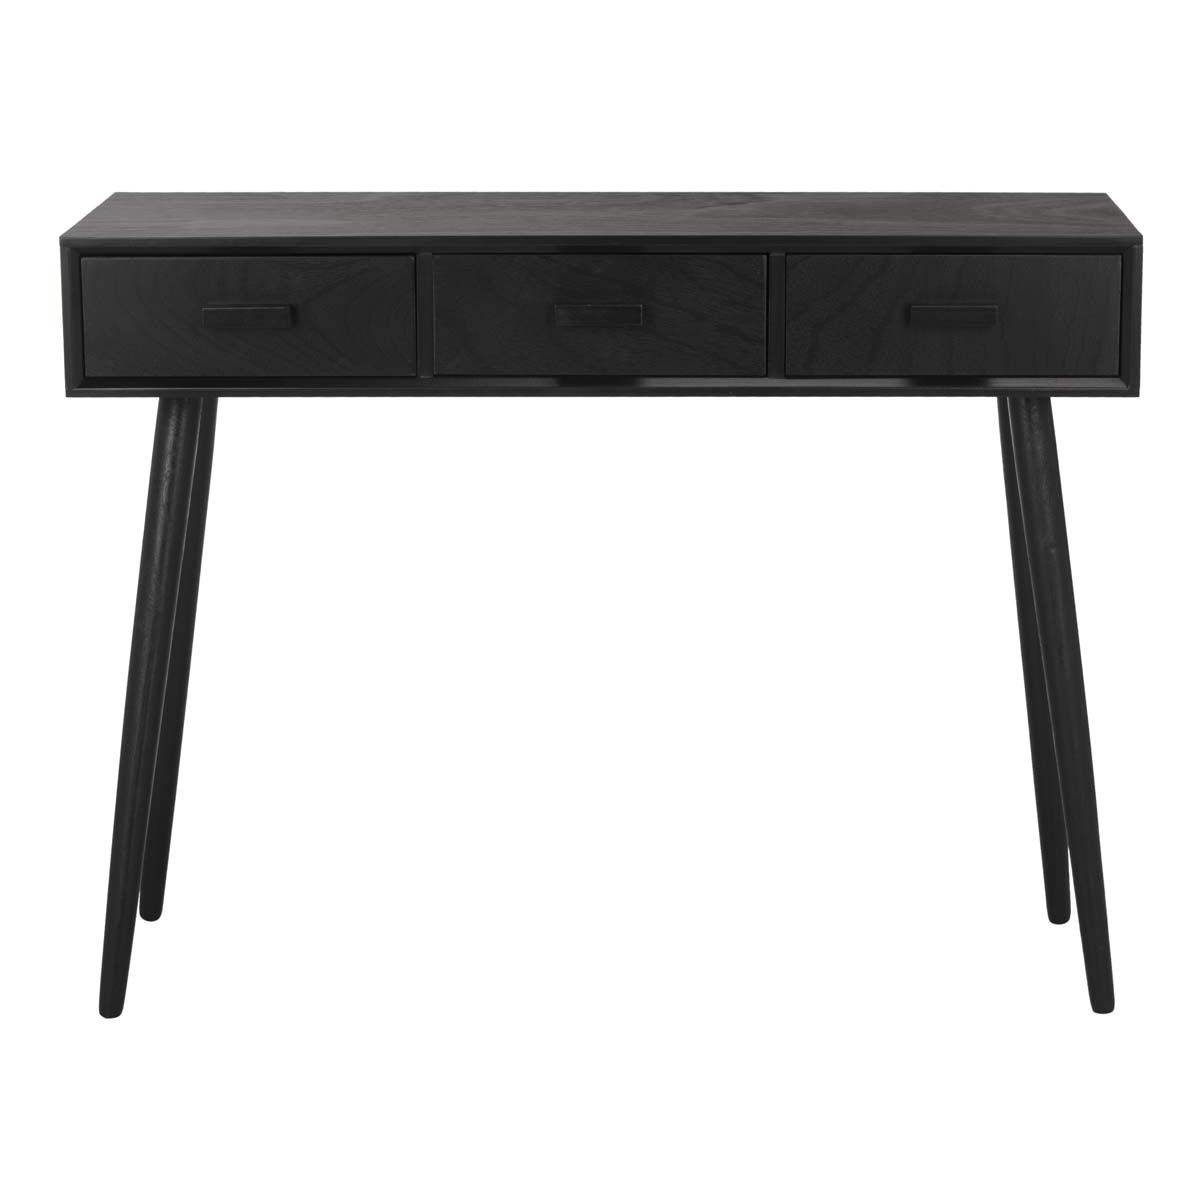 Safavieh Albus 3 Drawer Console Table , CNS5701